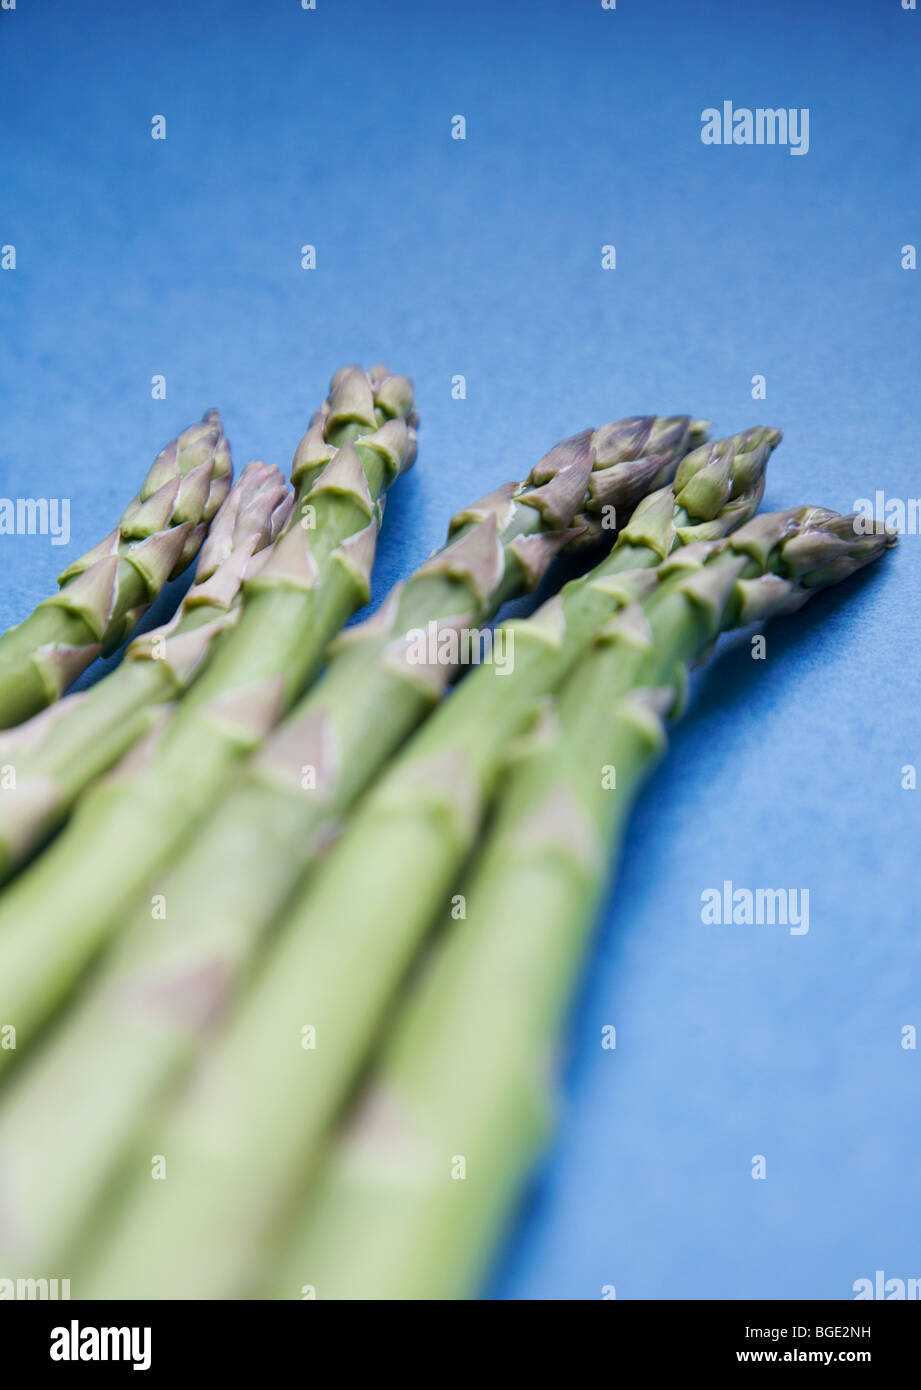 ASPARAGUS, GREEN, BLUE, HEALTHY, EATING, ORGANIC, GROWN, BUTTER, SEASONING, ROOTS, BRIGHT, COLOURS, FOOD, DRINK, FRIENDS, VEG Stock Photo